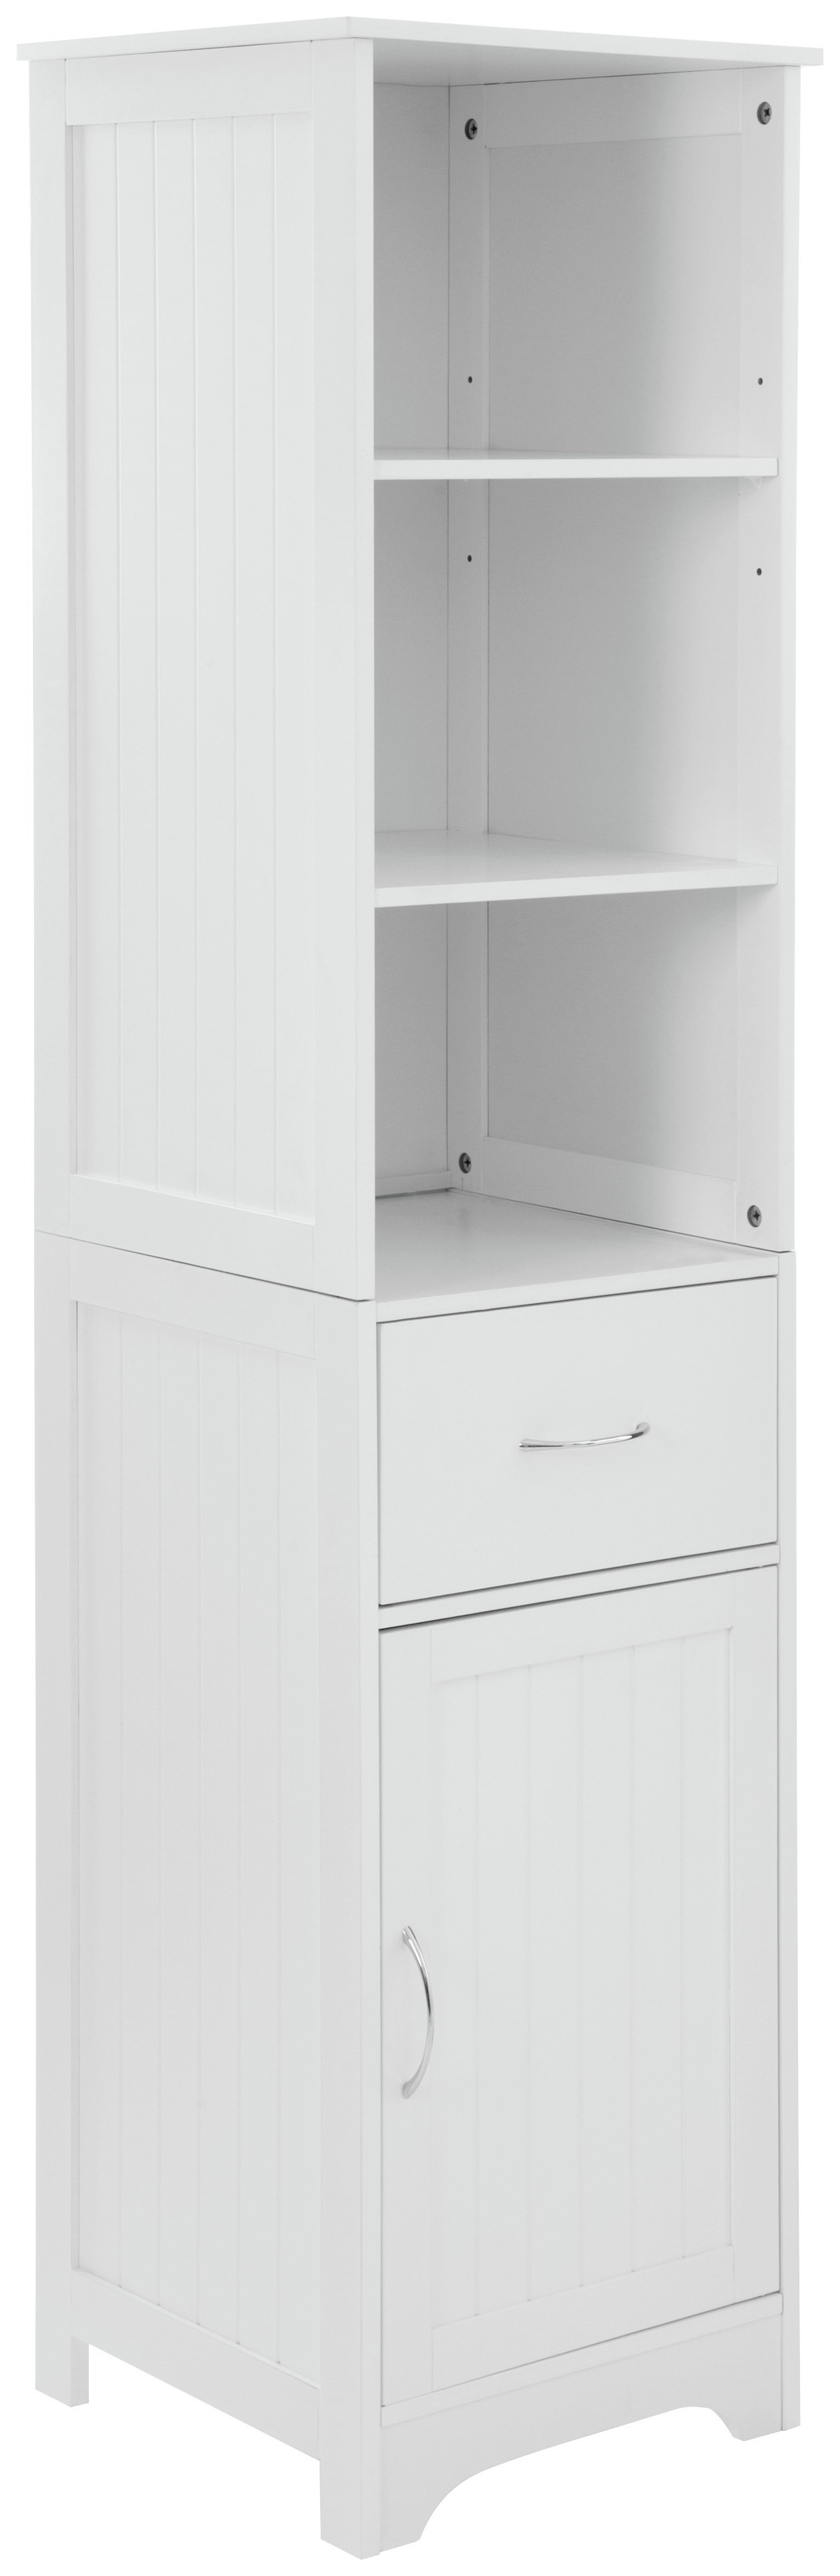 Premier Housewares Portland Tall Wooden Cabinet Review